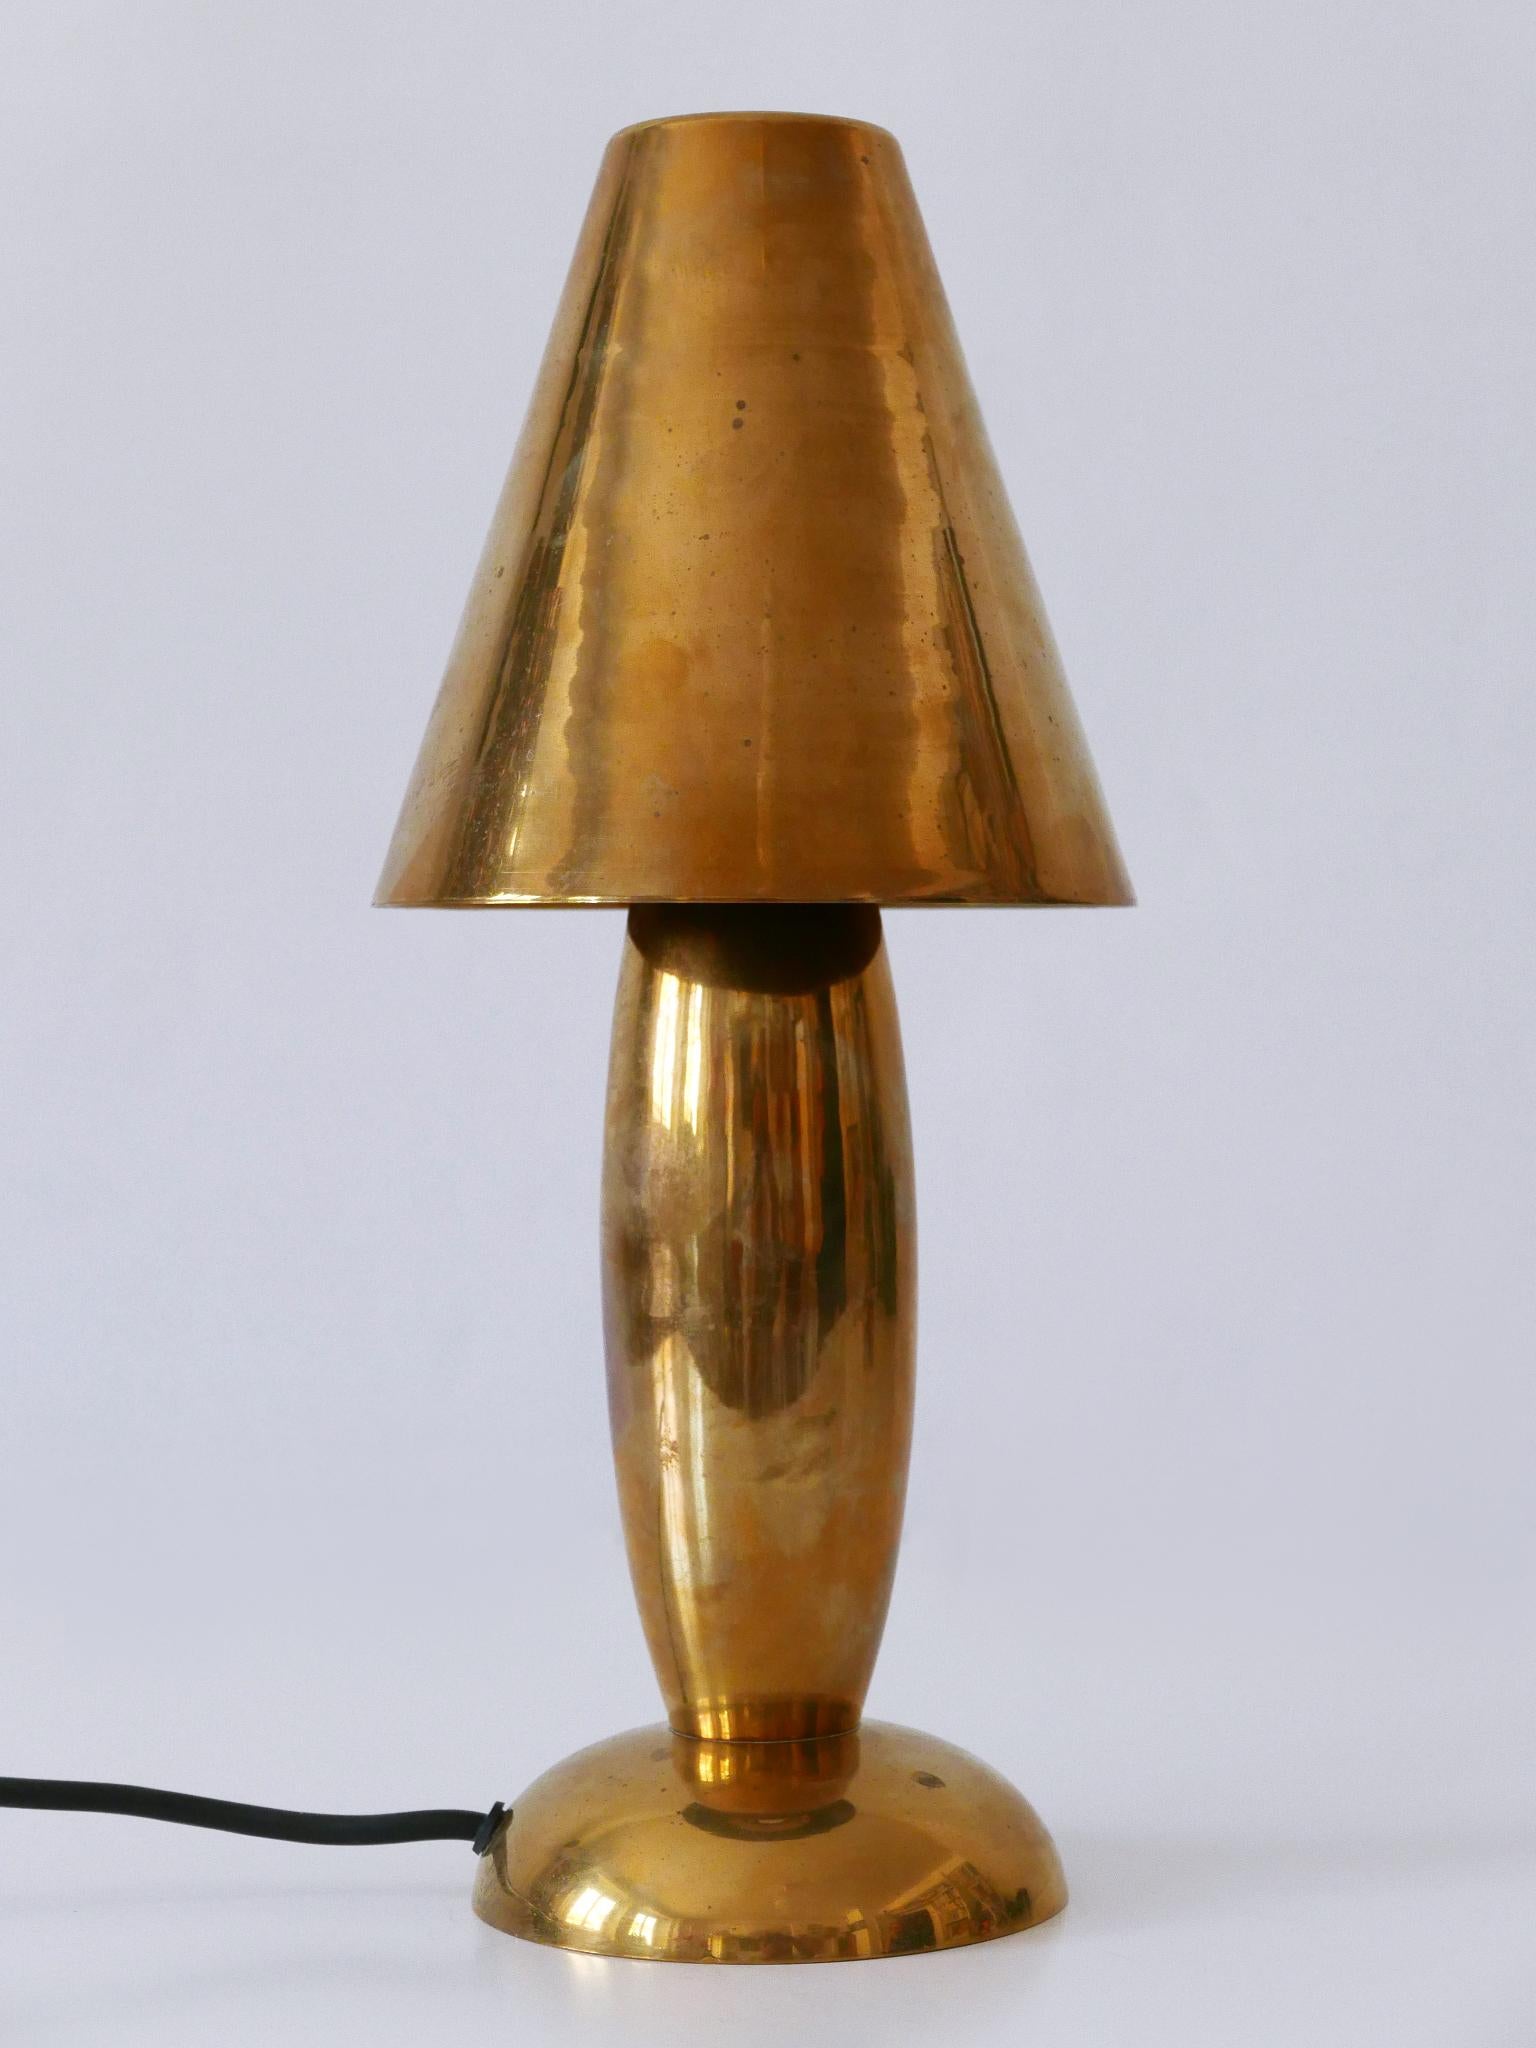 Rare & Lovely Mid-Century Modern Brass Side Table Lamp by Lambert Germany 1970s For Sale 5